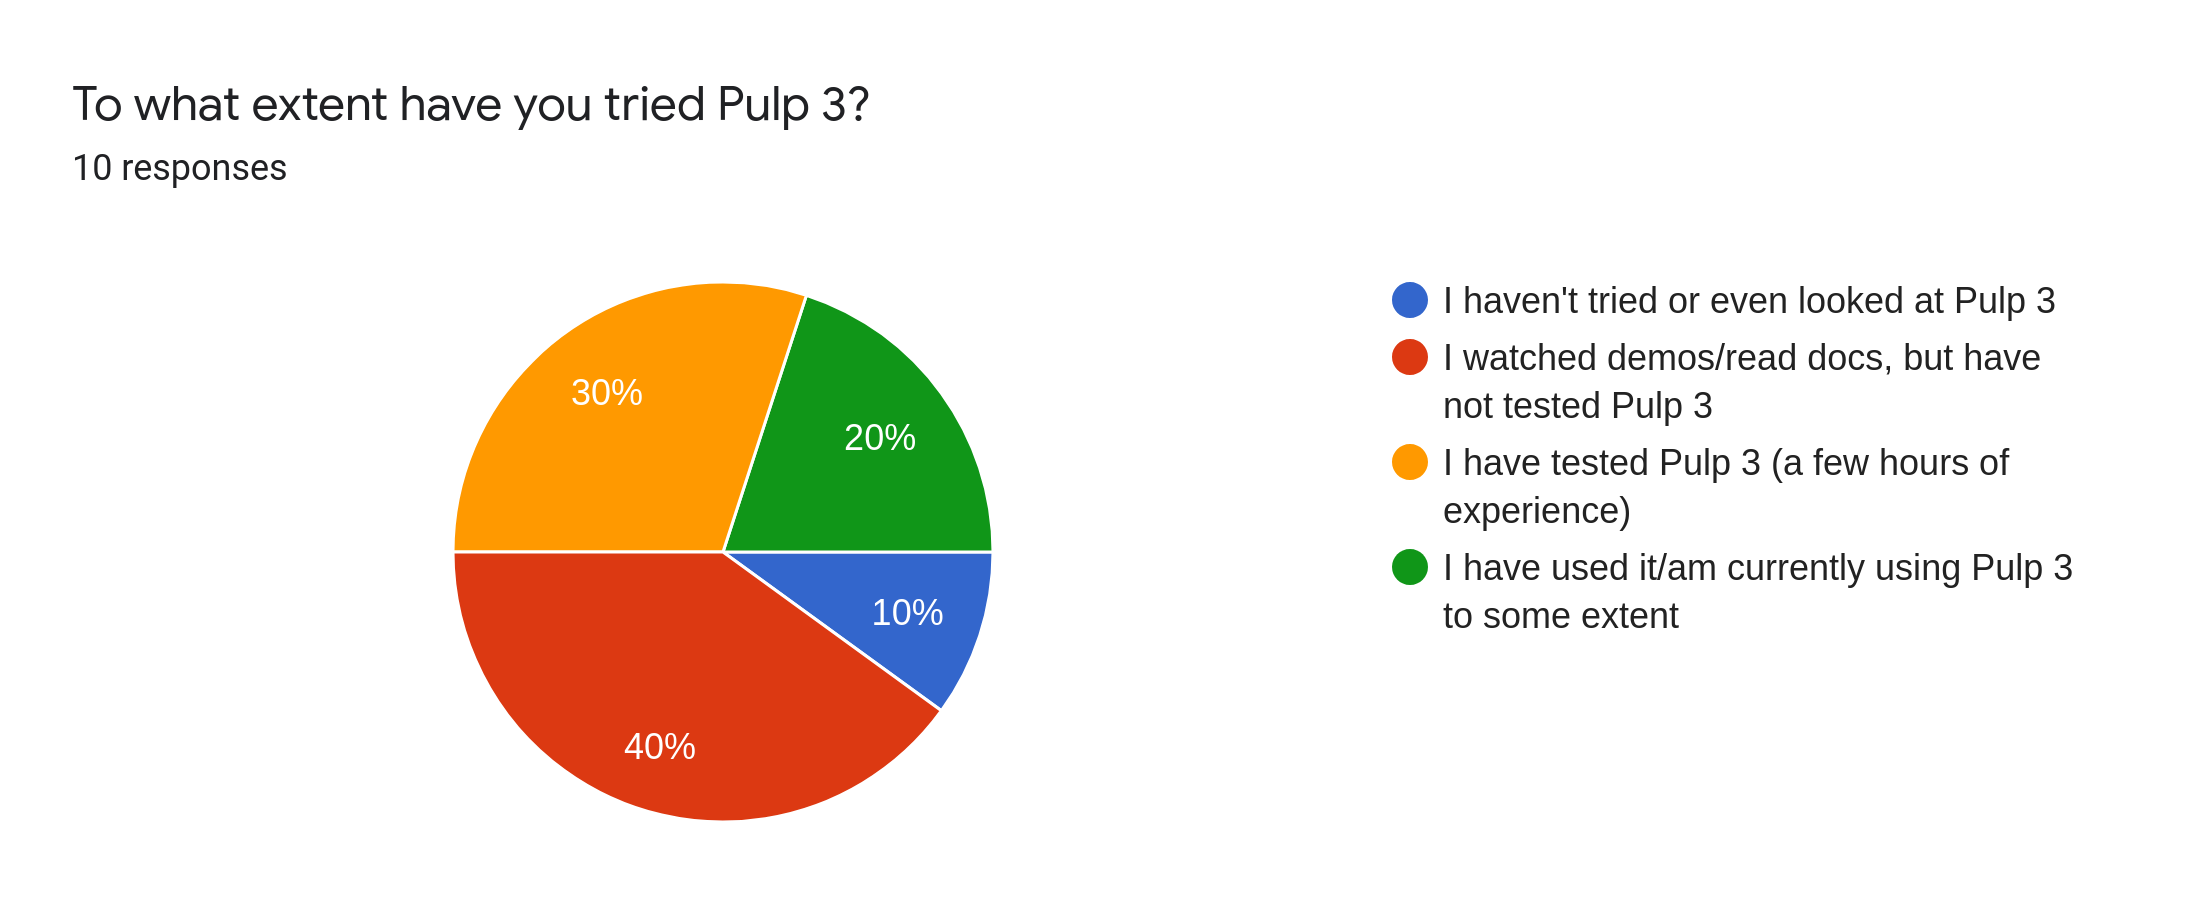 To what extent have you tried Pulp 3?